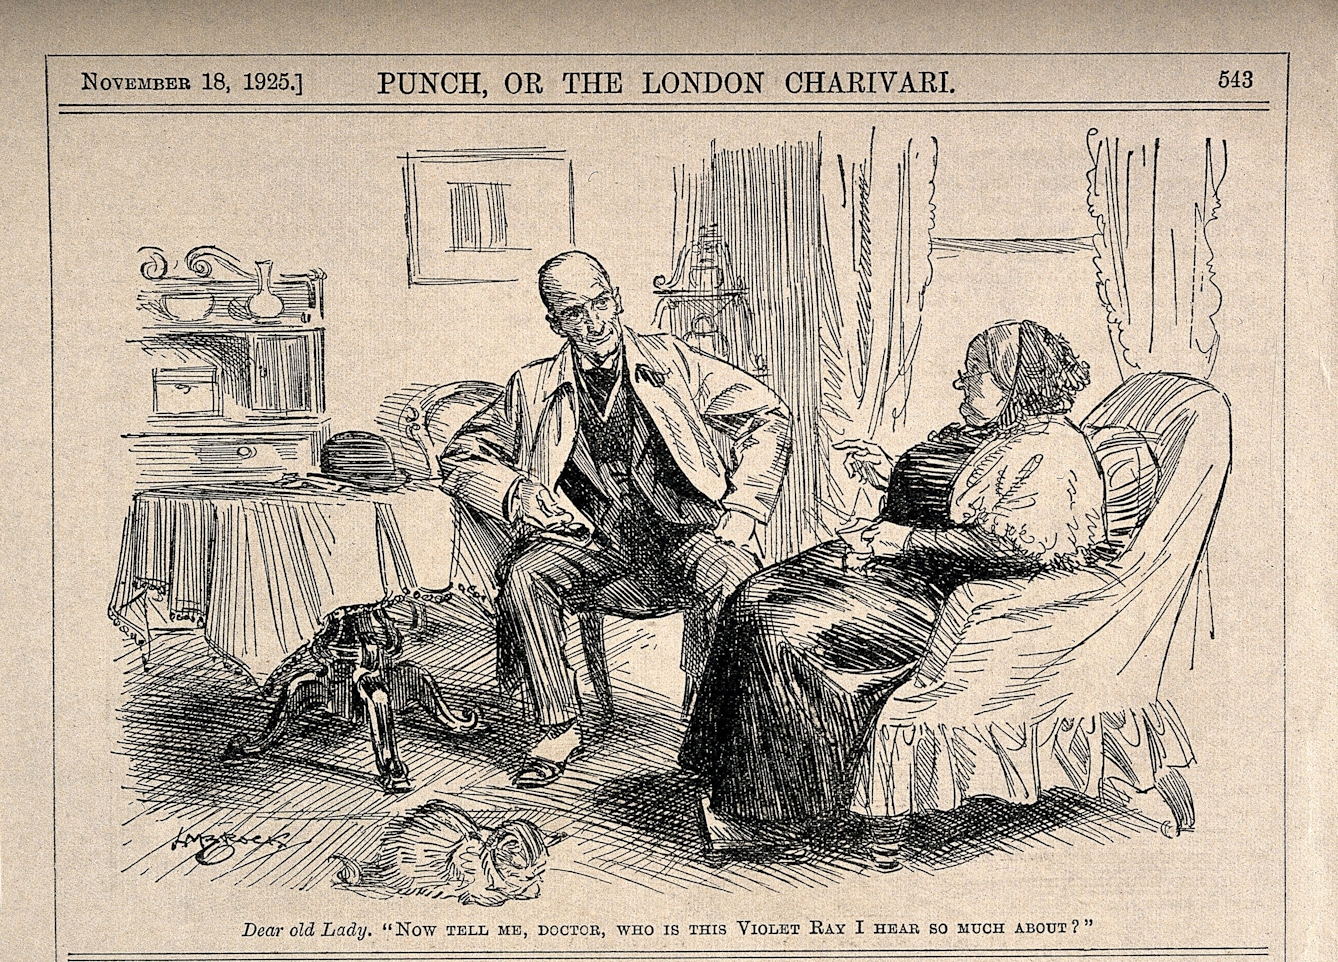 Black and white line drawing showing an old woman in an armchair with glasses perched on the end of her nose and a man sitting on a wooden chair beside her, arm leaning on the table. Caption below reads "Dear old Lady. 'Now tell me, Doctor, who is this Violet Ray I hear so much about?'"